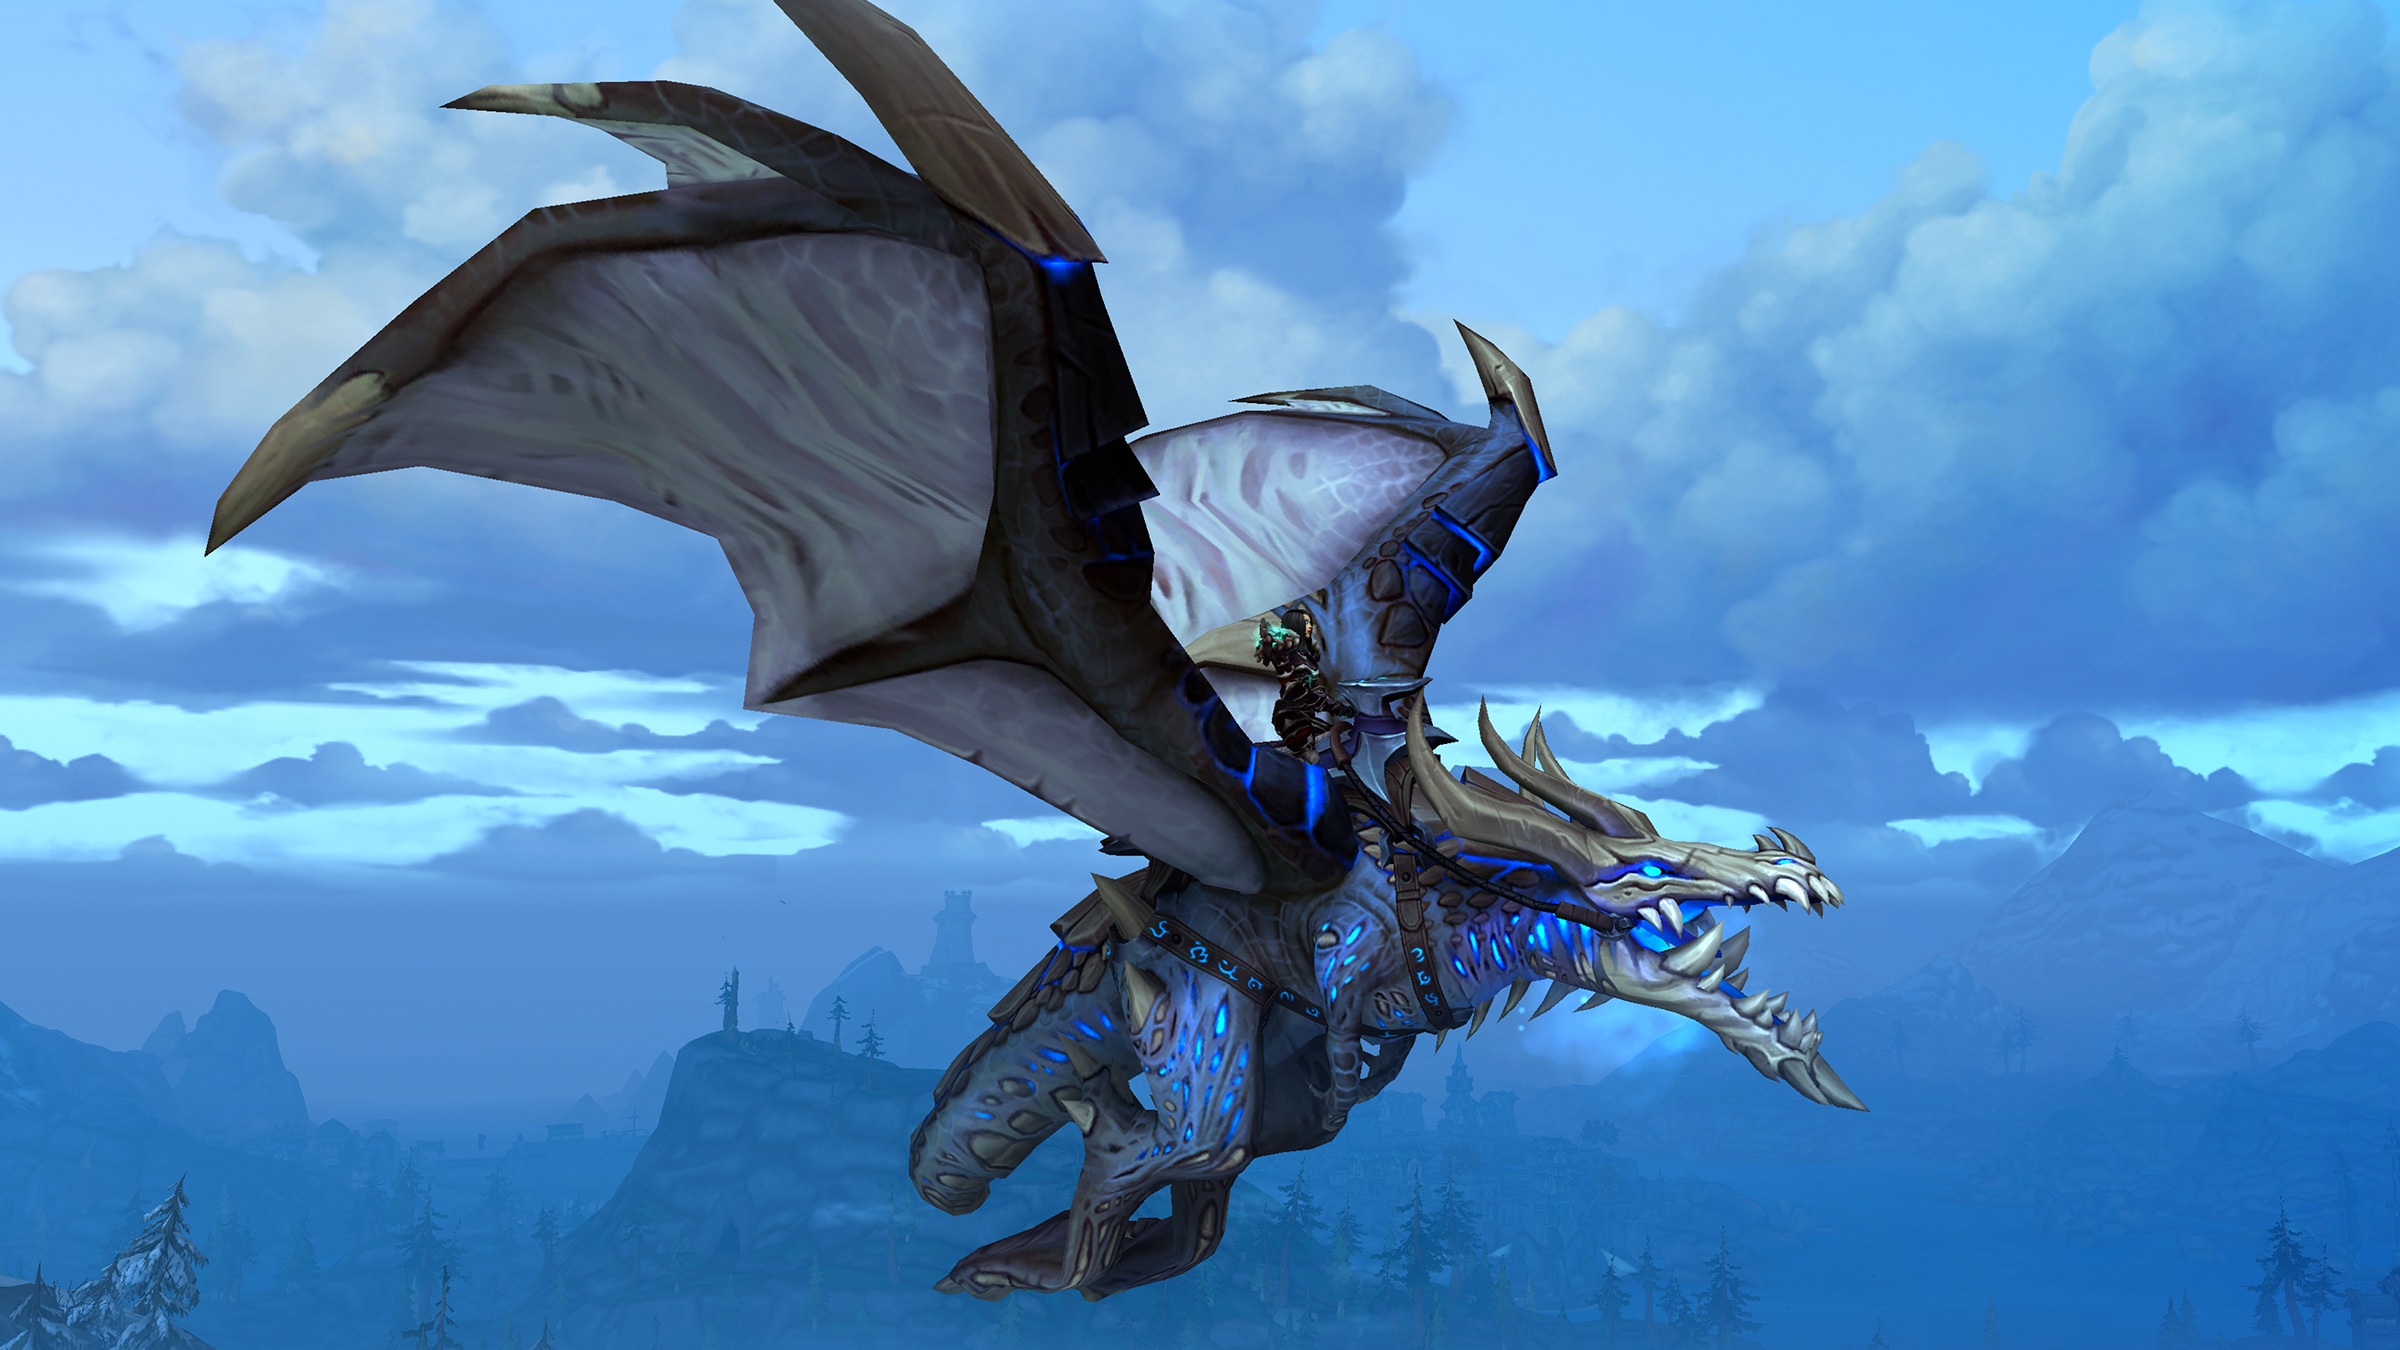 Play a Death Knight in Wrath of the Lich King Classic™ Before 11/28 and Get a Mount in WoW